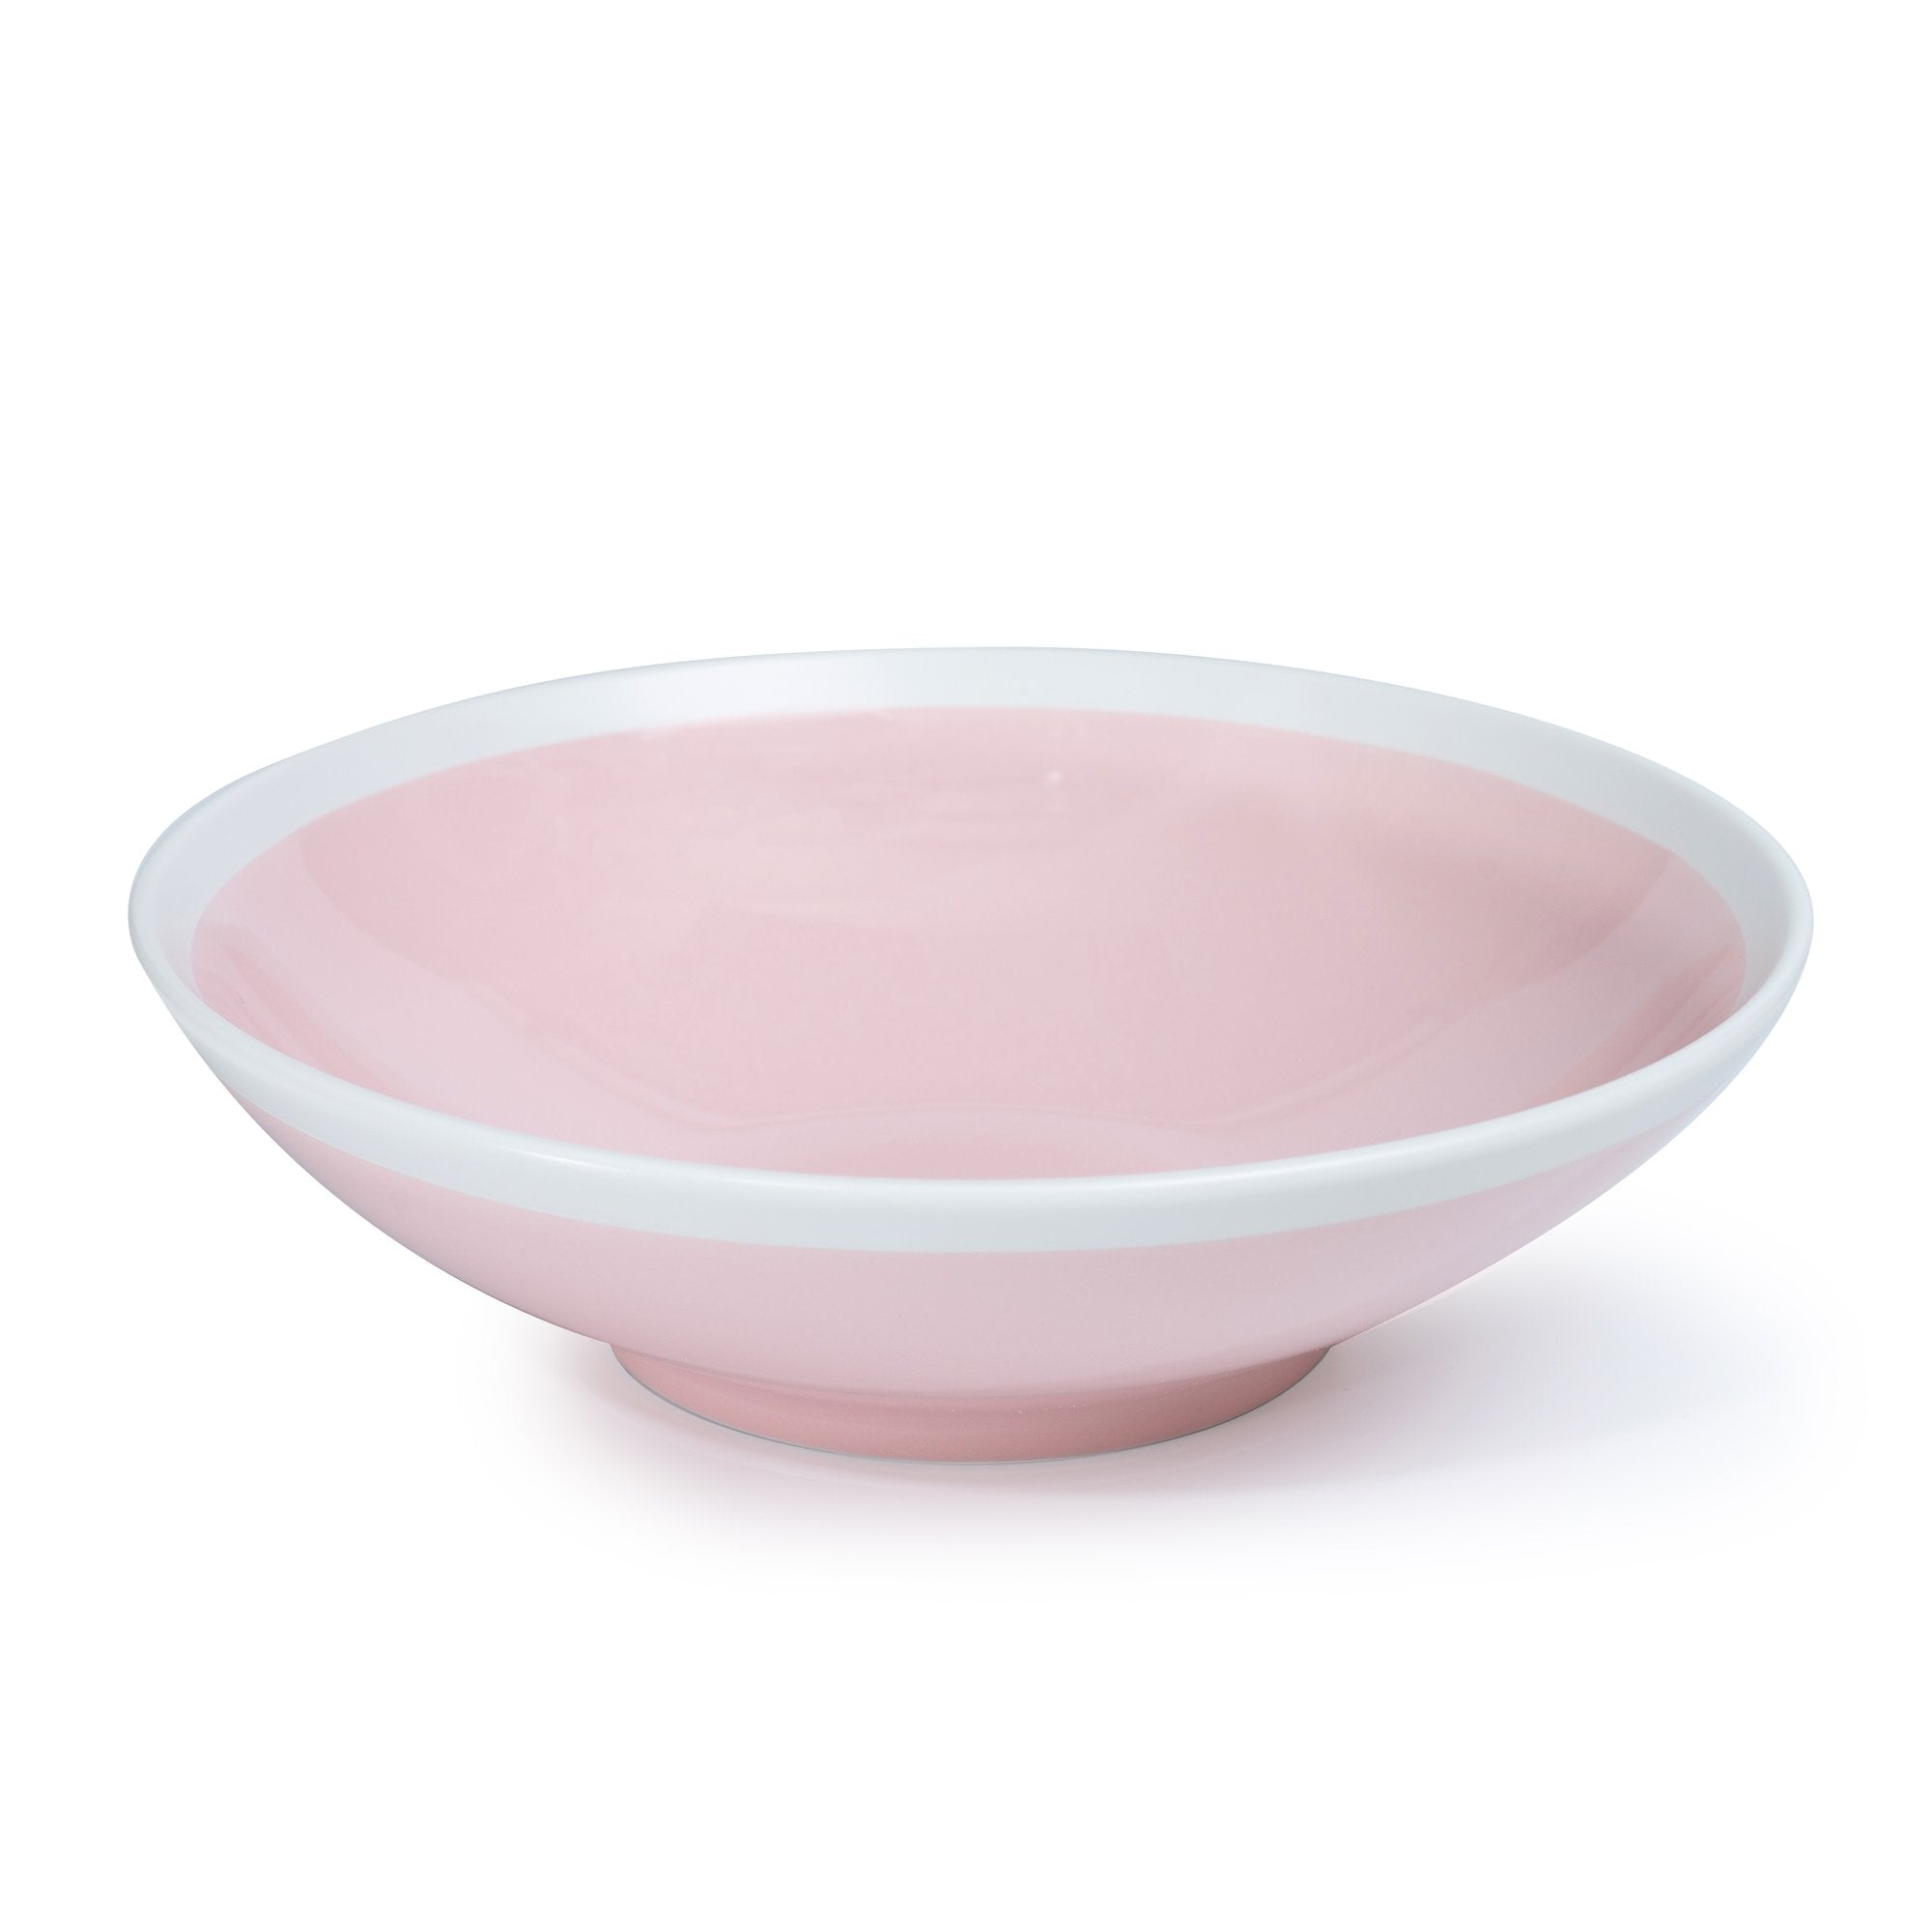 Cozy Pink by Don Bellini, Round Bowl